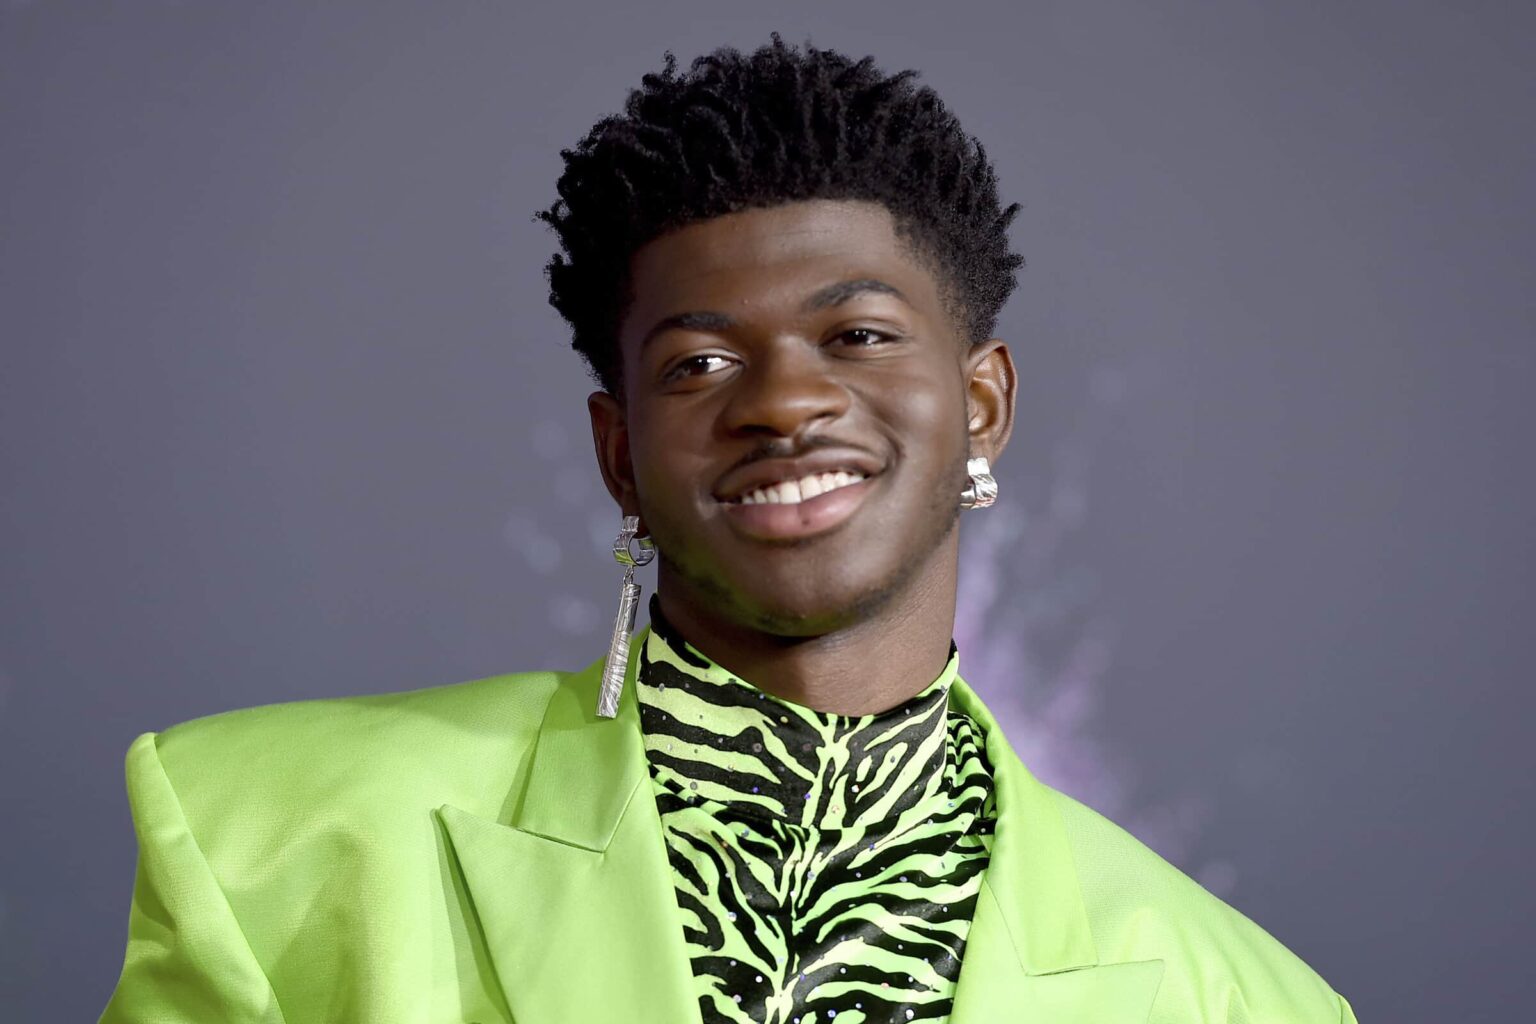 Lil Nas X seems to be in the midst of a personal renaissance in 2021. With his career beginning to boom, see his net worth and check out his latest songs!